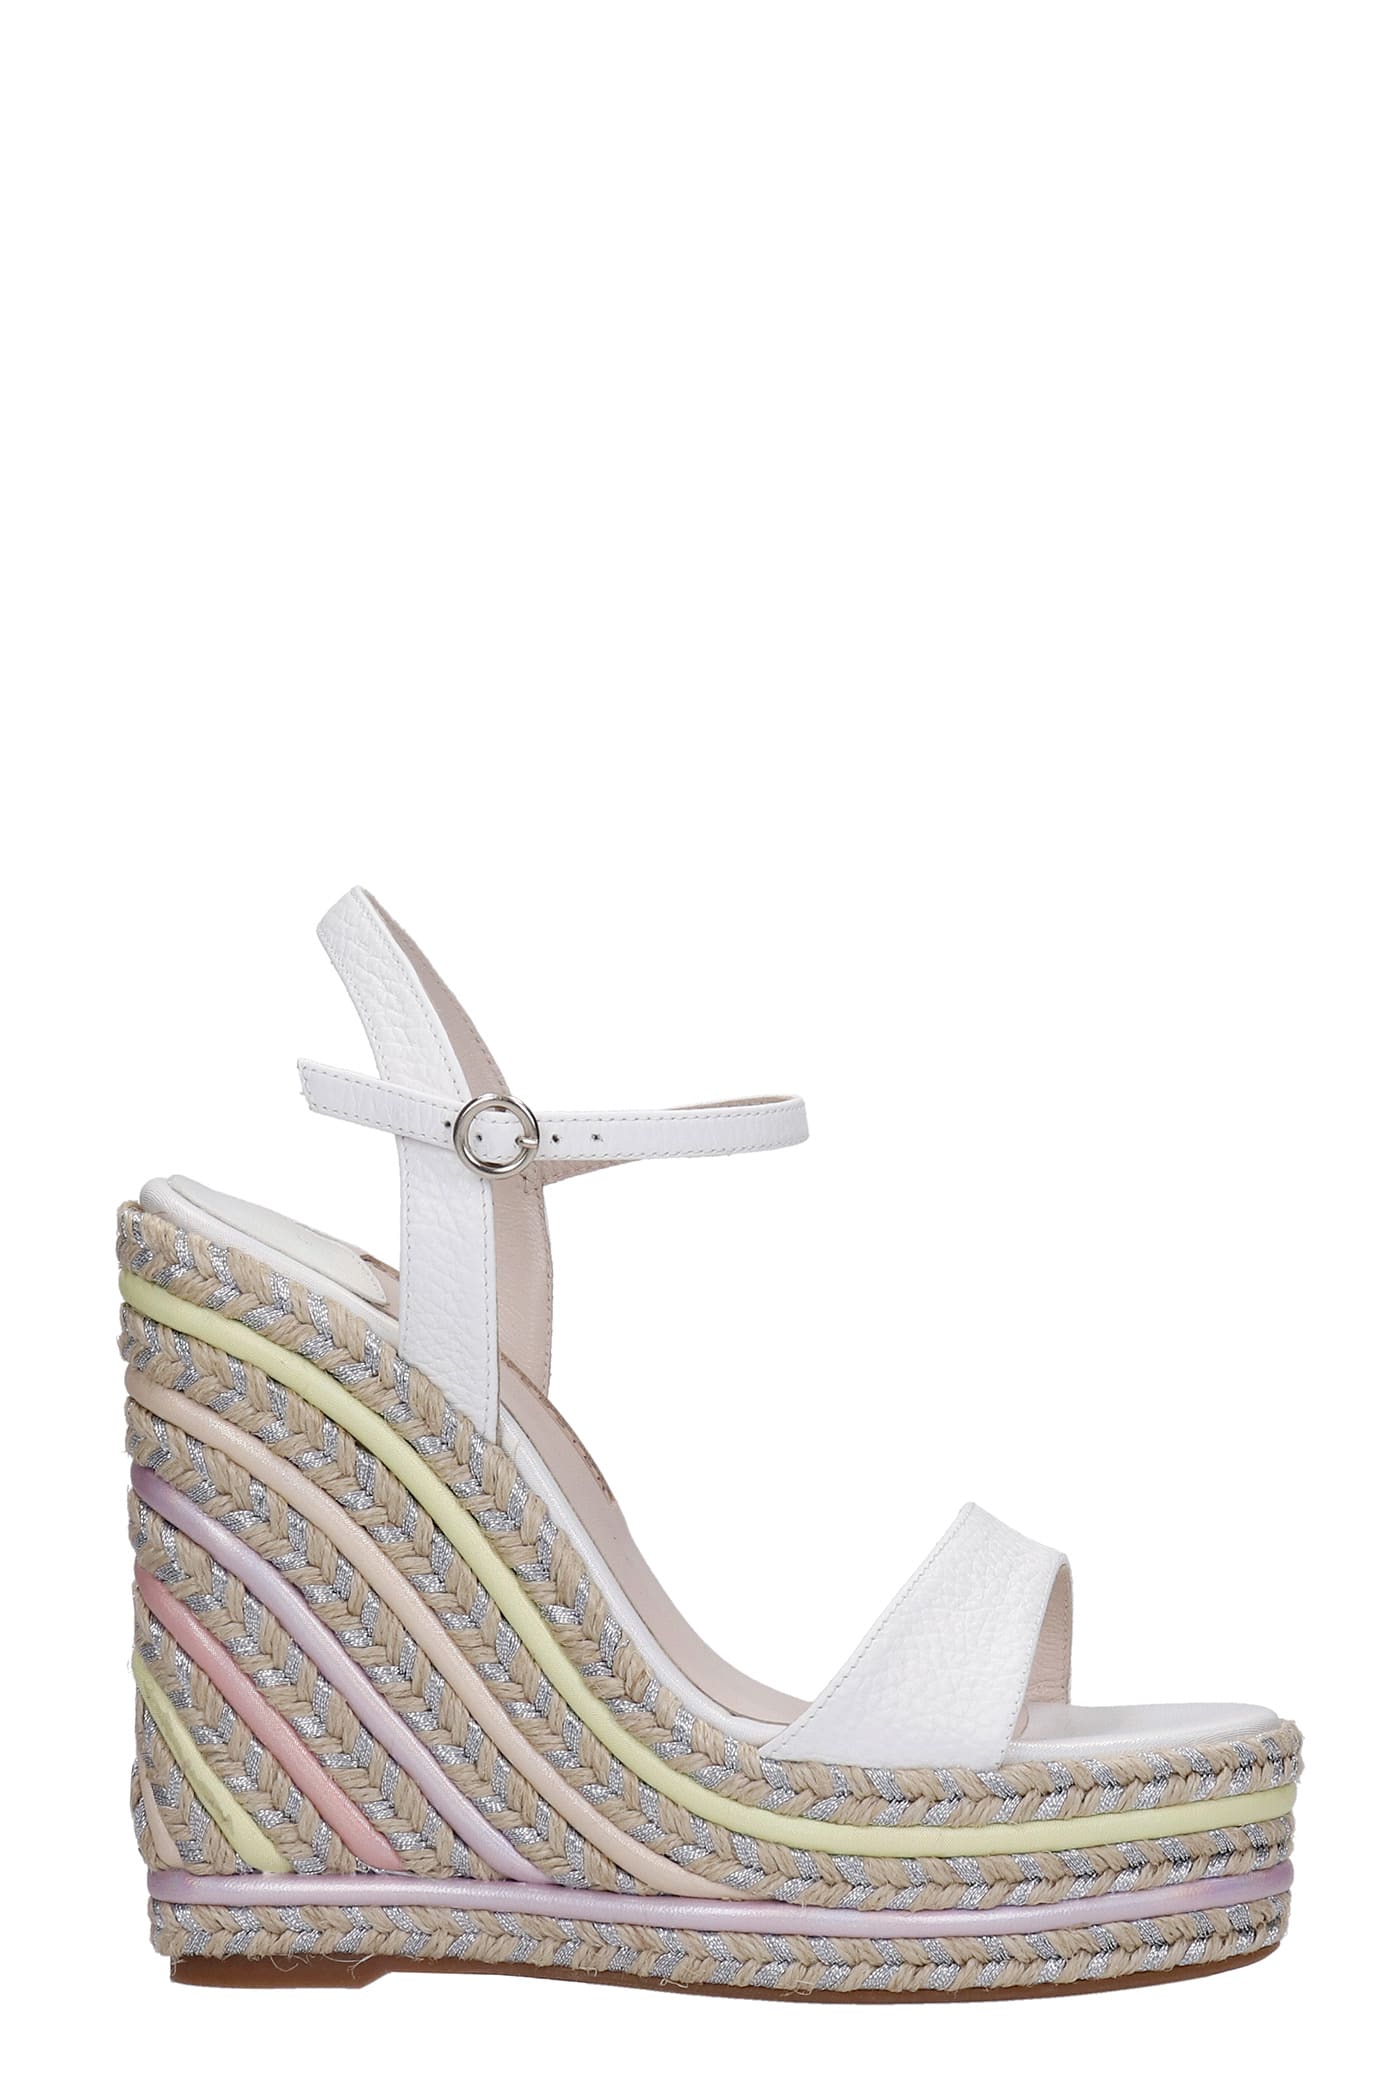 SOPHIA WEBSTER LUCITA WEDGES IN WHITE LEATHER,FSS21107